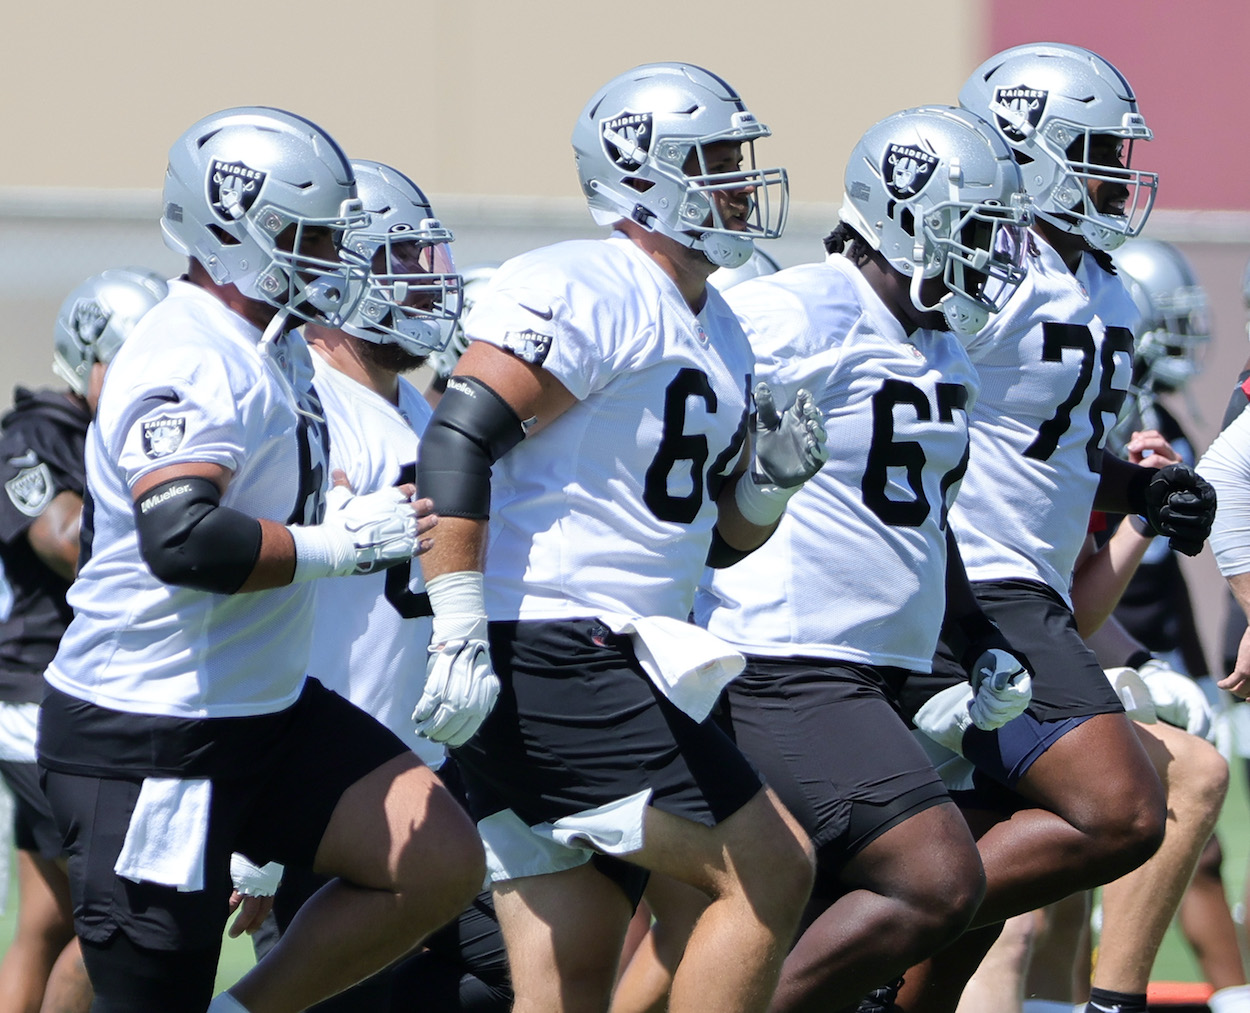 One of the key Las Vegas Raiders training camp battles is on the offensive line (pictured).